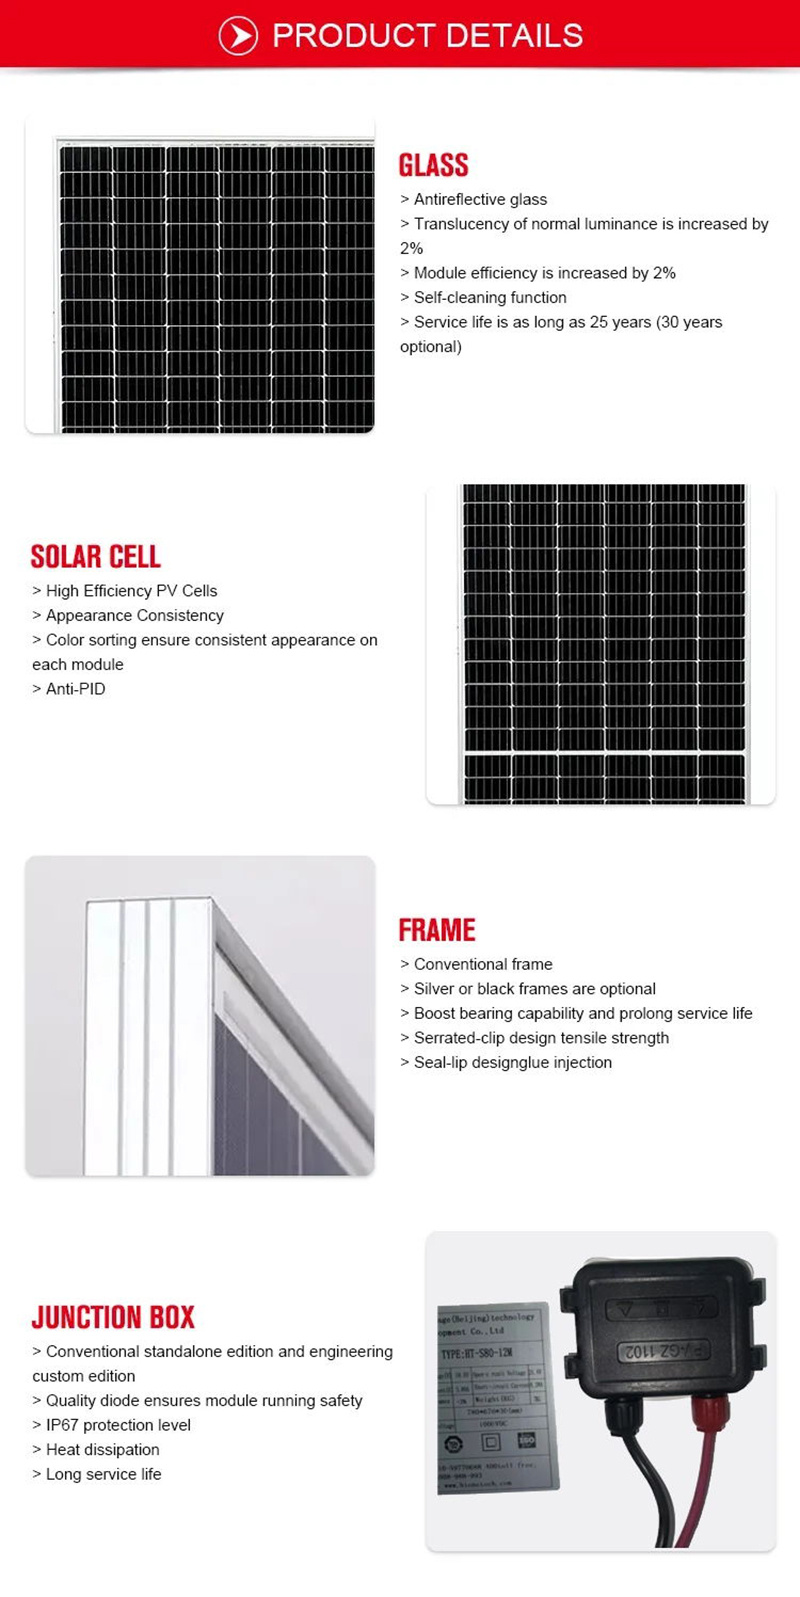 Solar Photovoltaic Panel 50W, Monocrystalline Silicon, Polycrystalline Silicon Power Generation System for Industrial, Agricultural, and Household